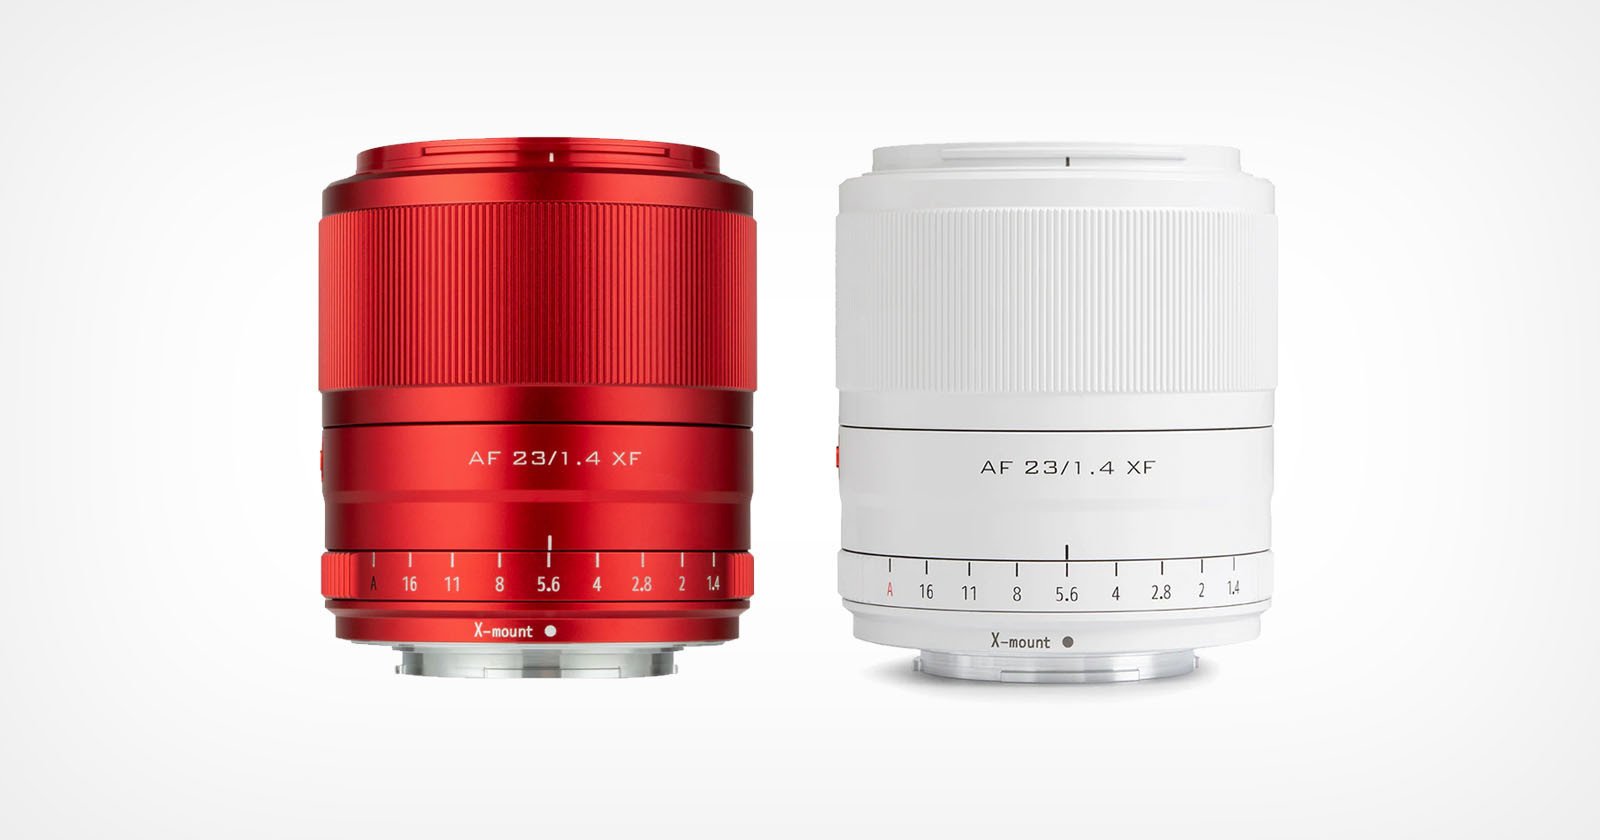 Viltrox is Making Limited Edition White or Red Fuji X-Mount Prime Lenses